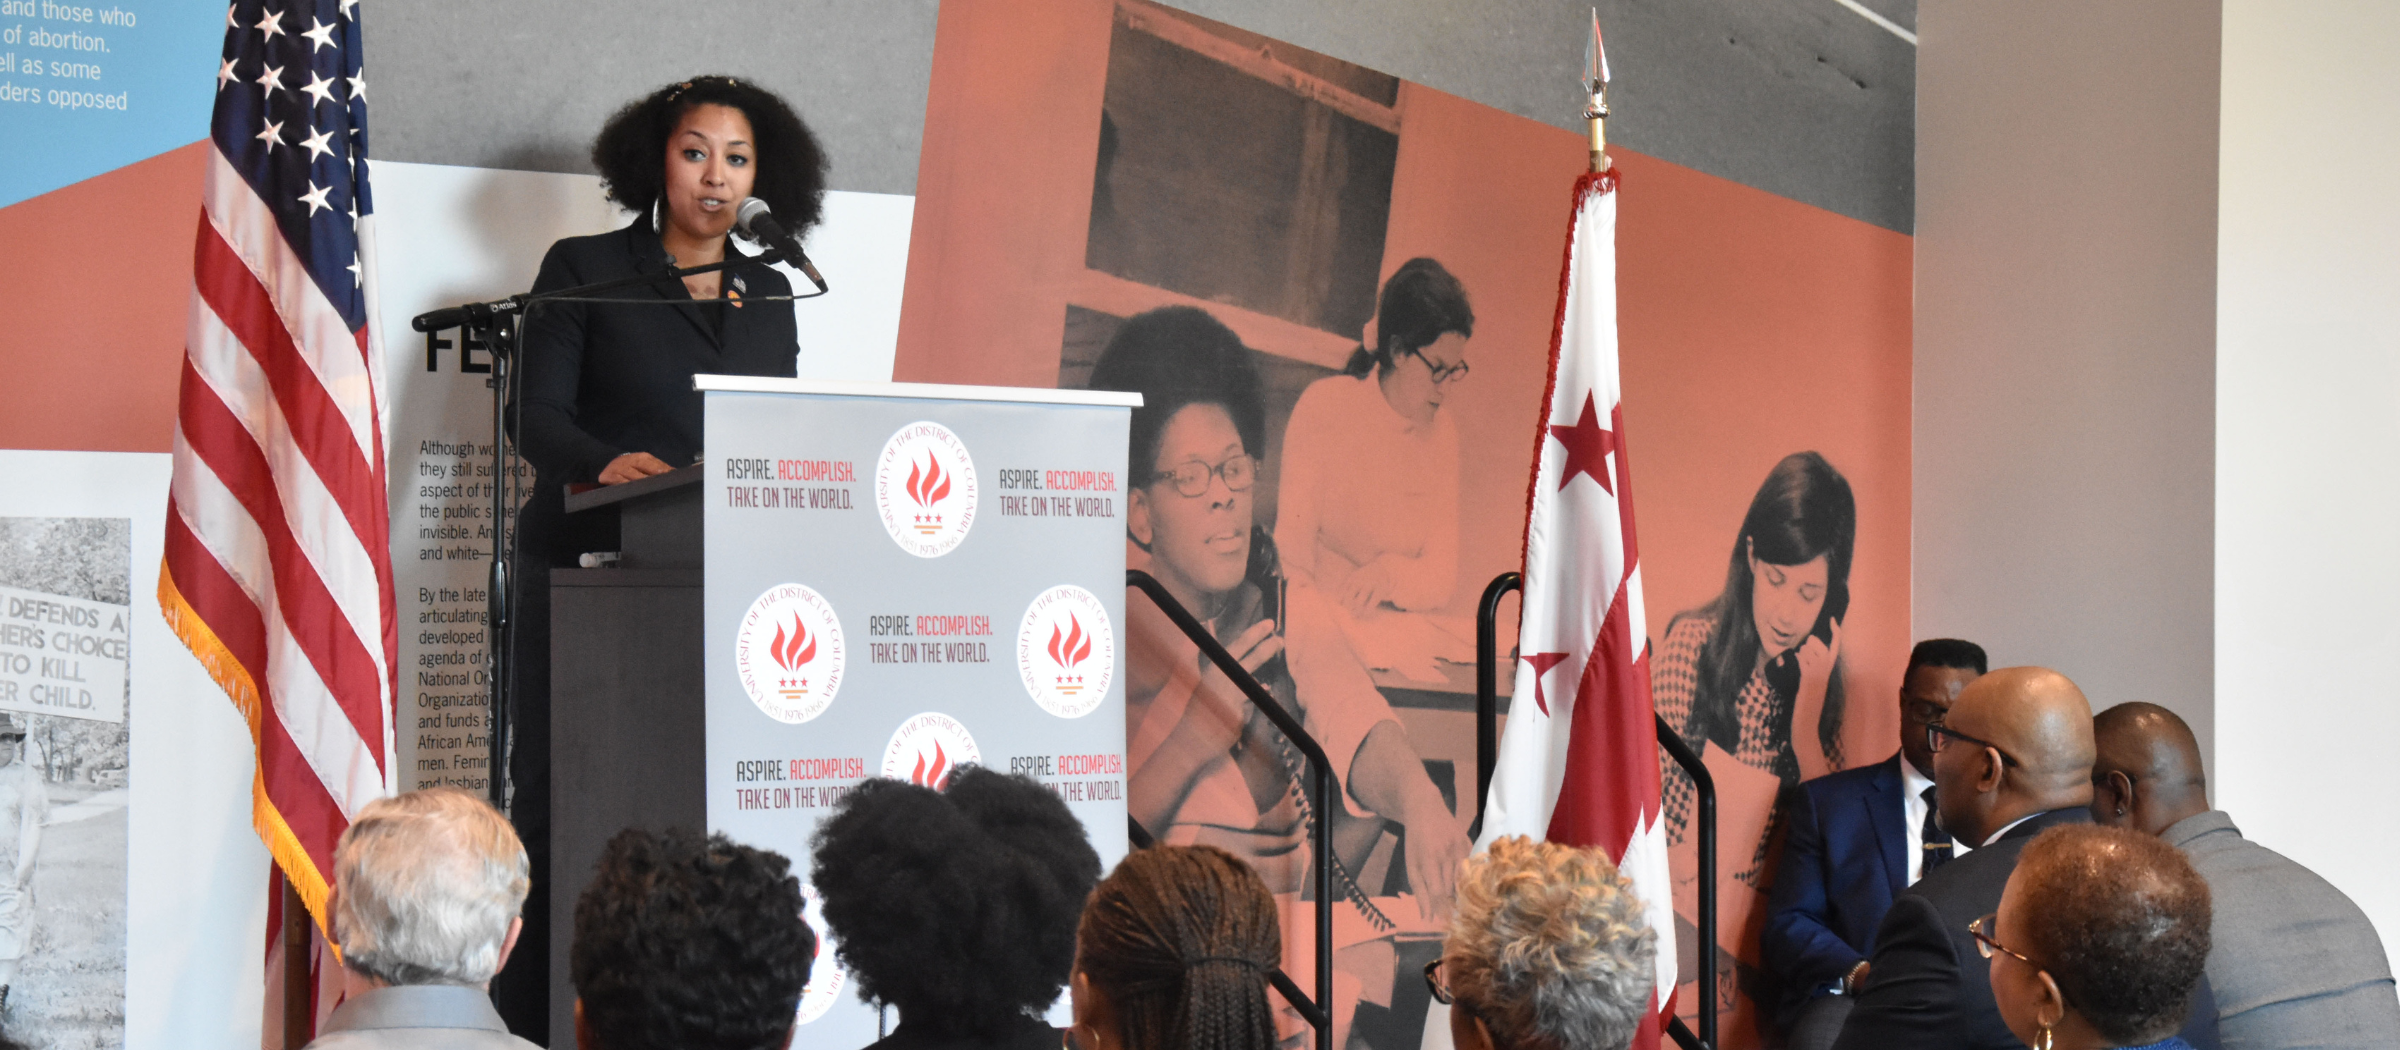 UDC’s 17th Annual Veterans Day Observance Program pays homage to those who served